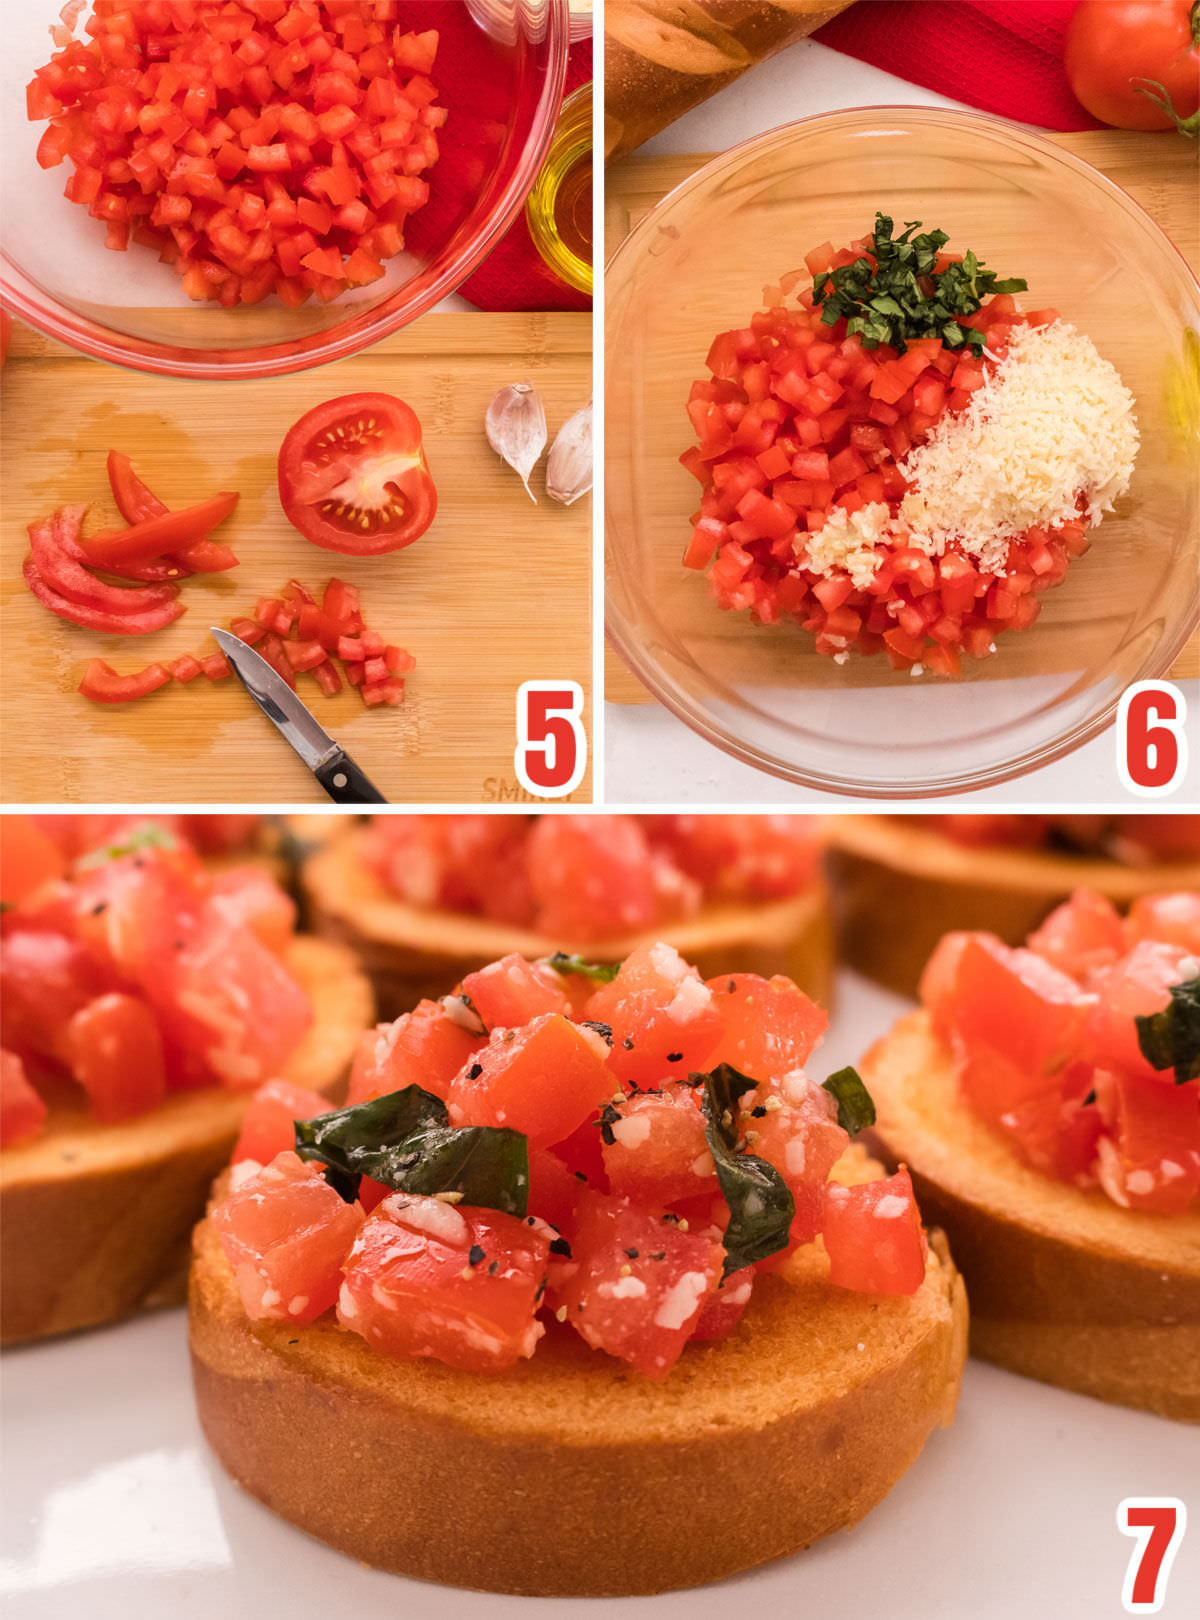 Collage image showing all the steps for making the tomato, basil and garlic topping for the Easy Italian Bruschetta recipe.